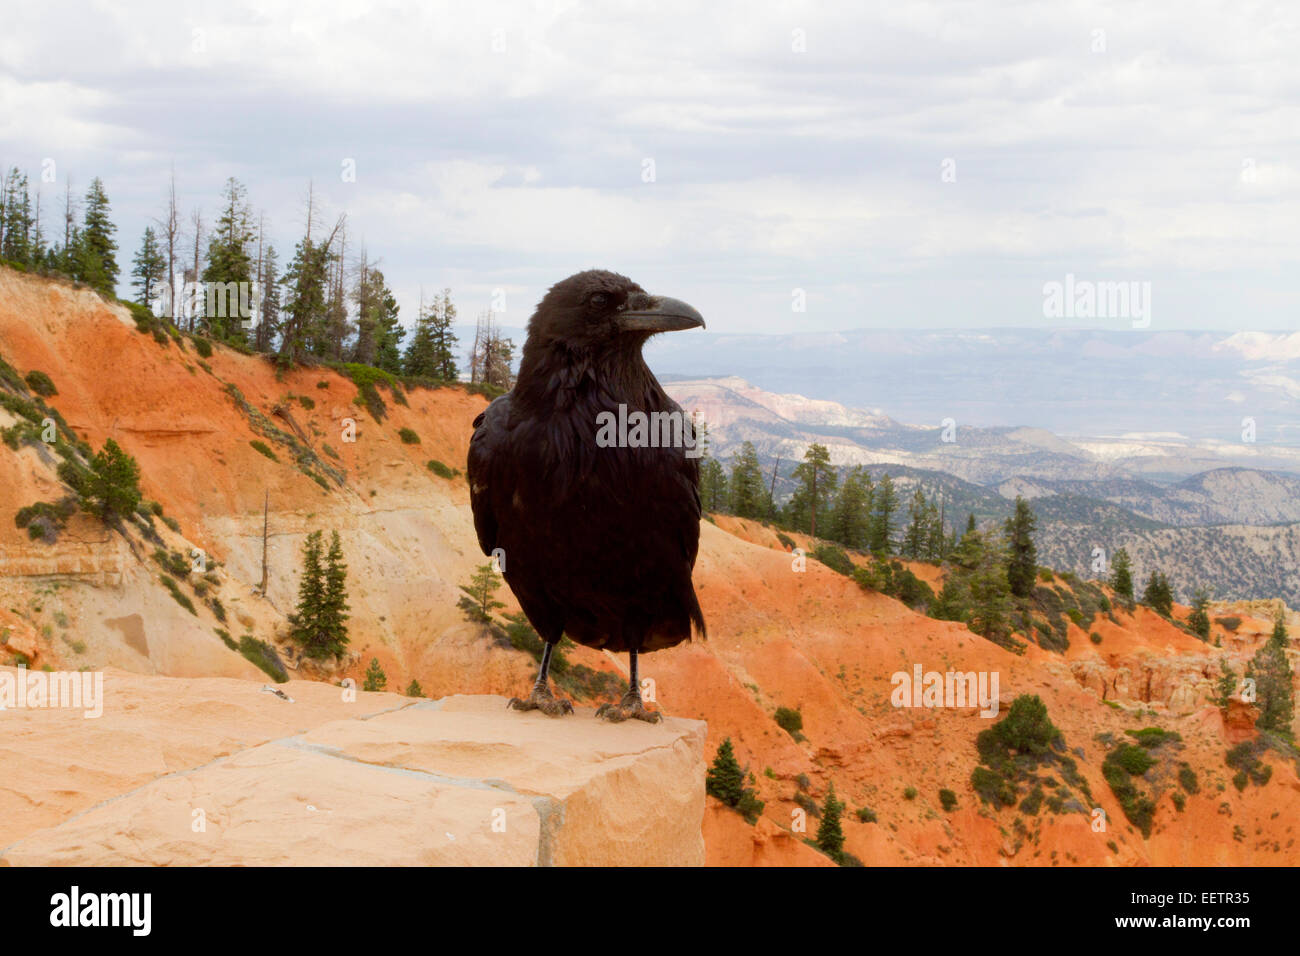 Common Raven (Corvus corax) perched on a wall overlooking Ponderosa Canyon at Bryce Canon National Park, Utah, USA in July Stock Photo